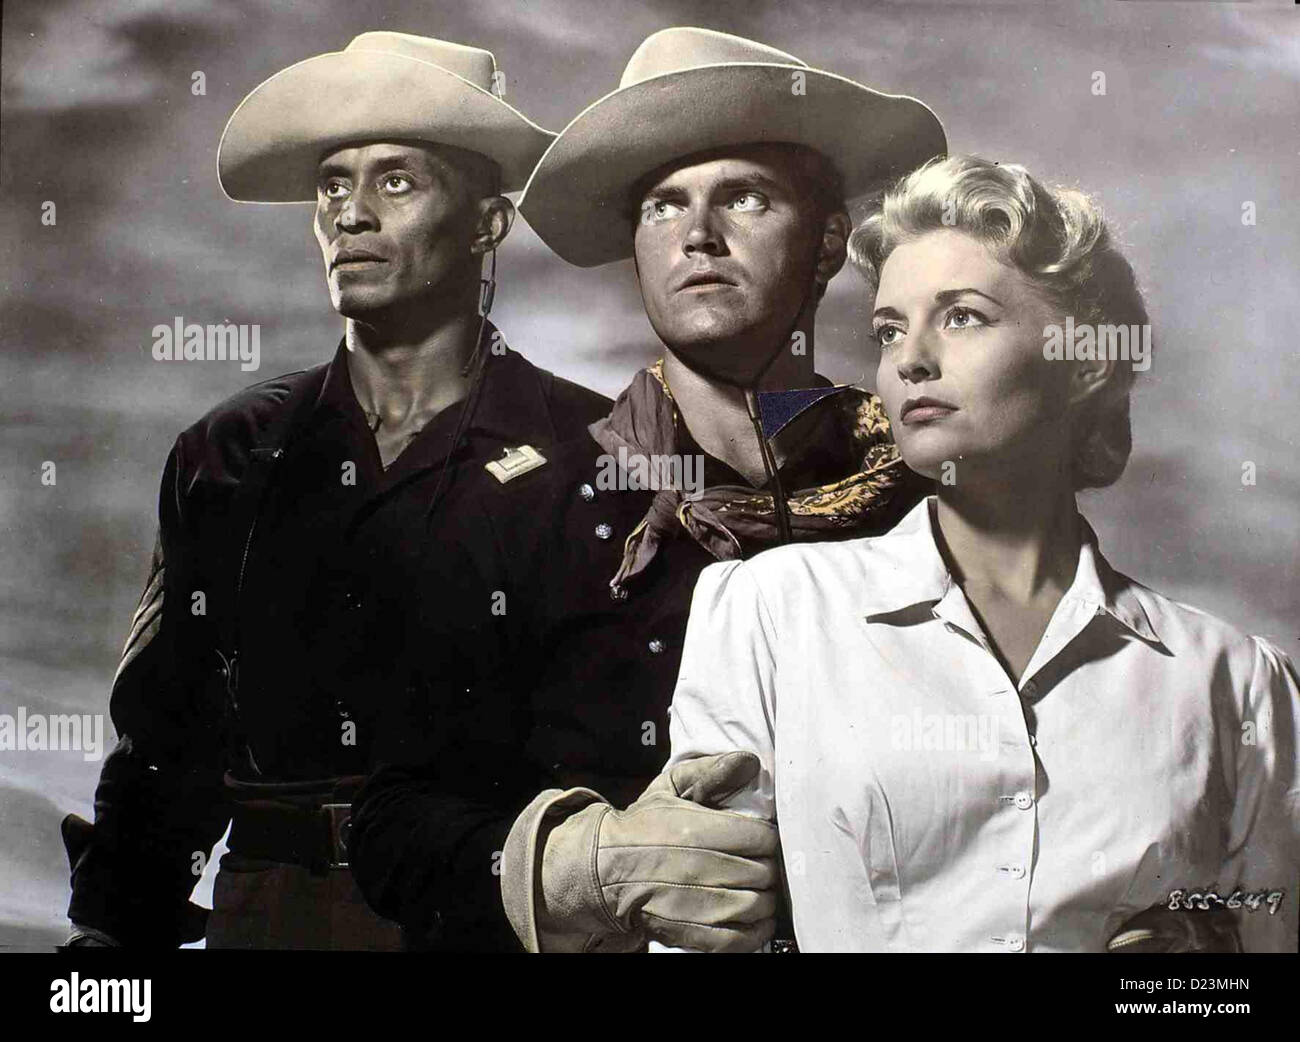 WOODY STRODE SERGEANT RUTLEDGE 1960 ACTOR 8x10" HAND COLOR TINTED PHOTOGRAPH